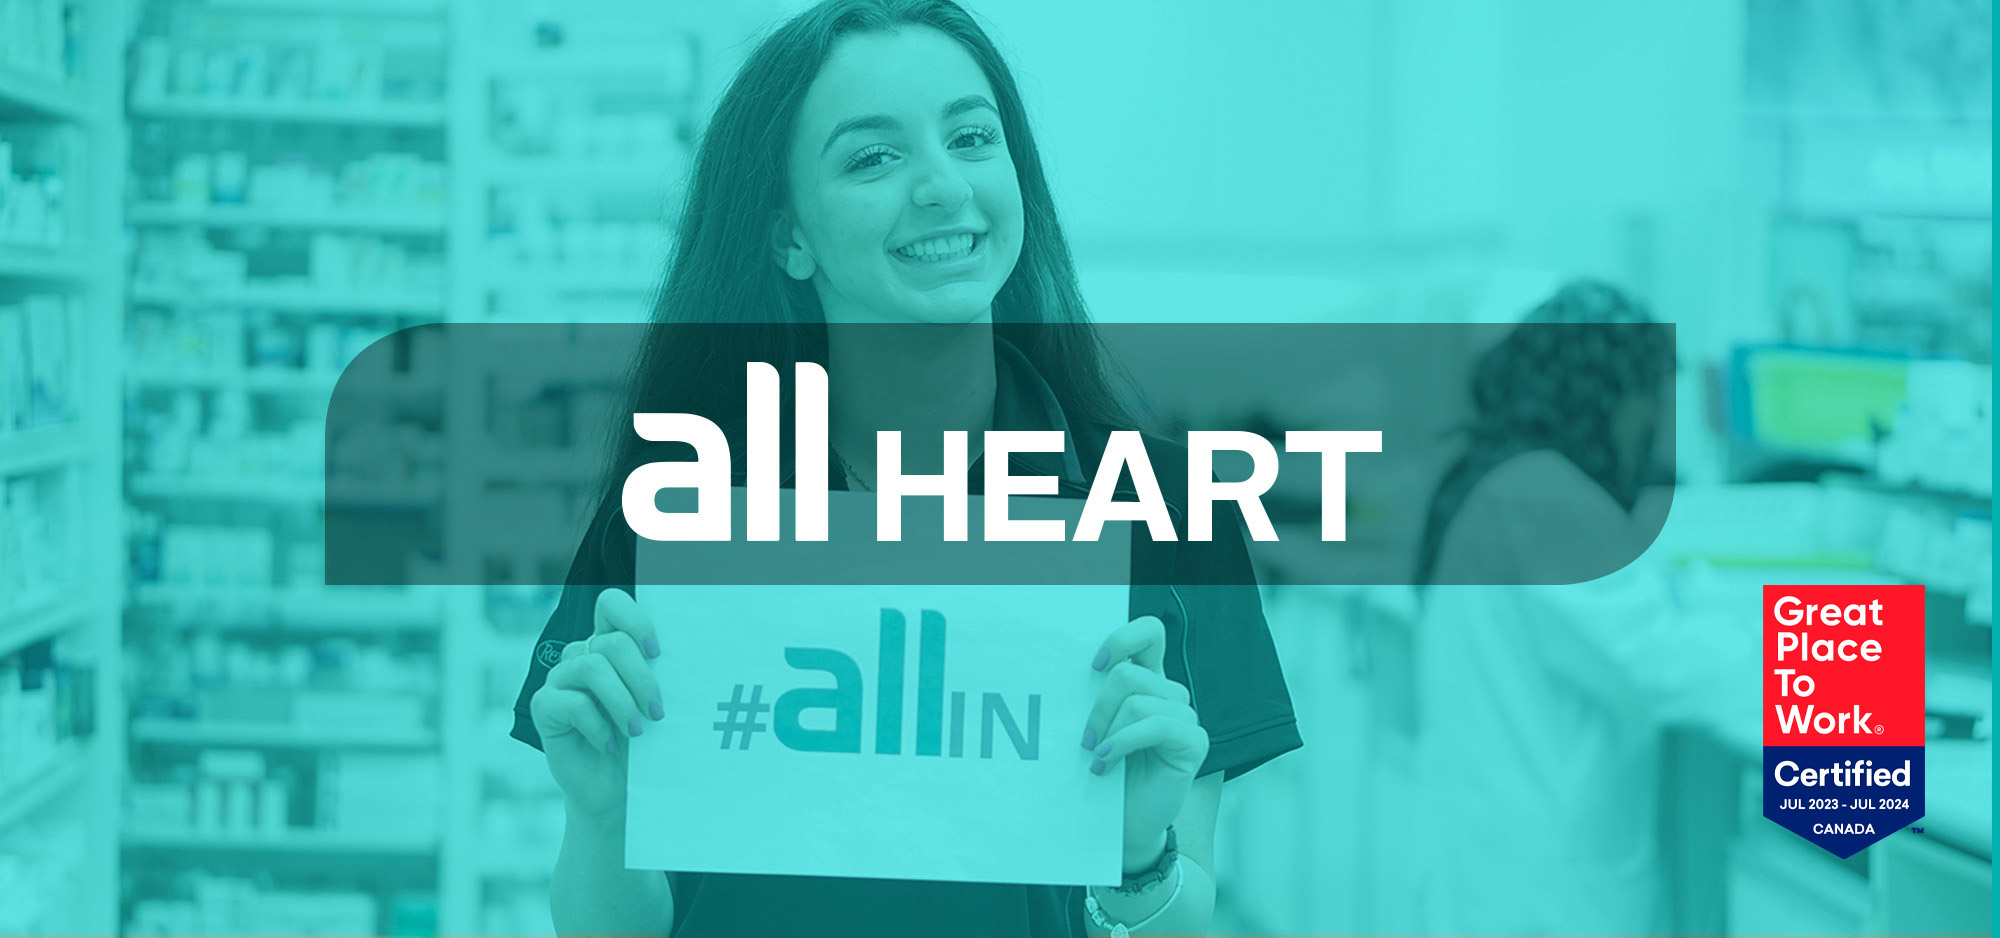 All Heart. Great Place to Work®. Certified Jul 2022 - Jun 2023 Canada